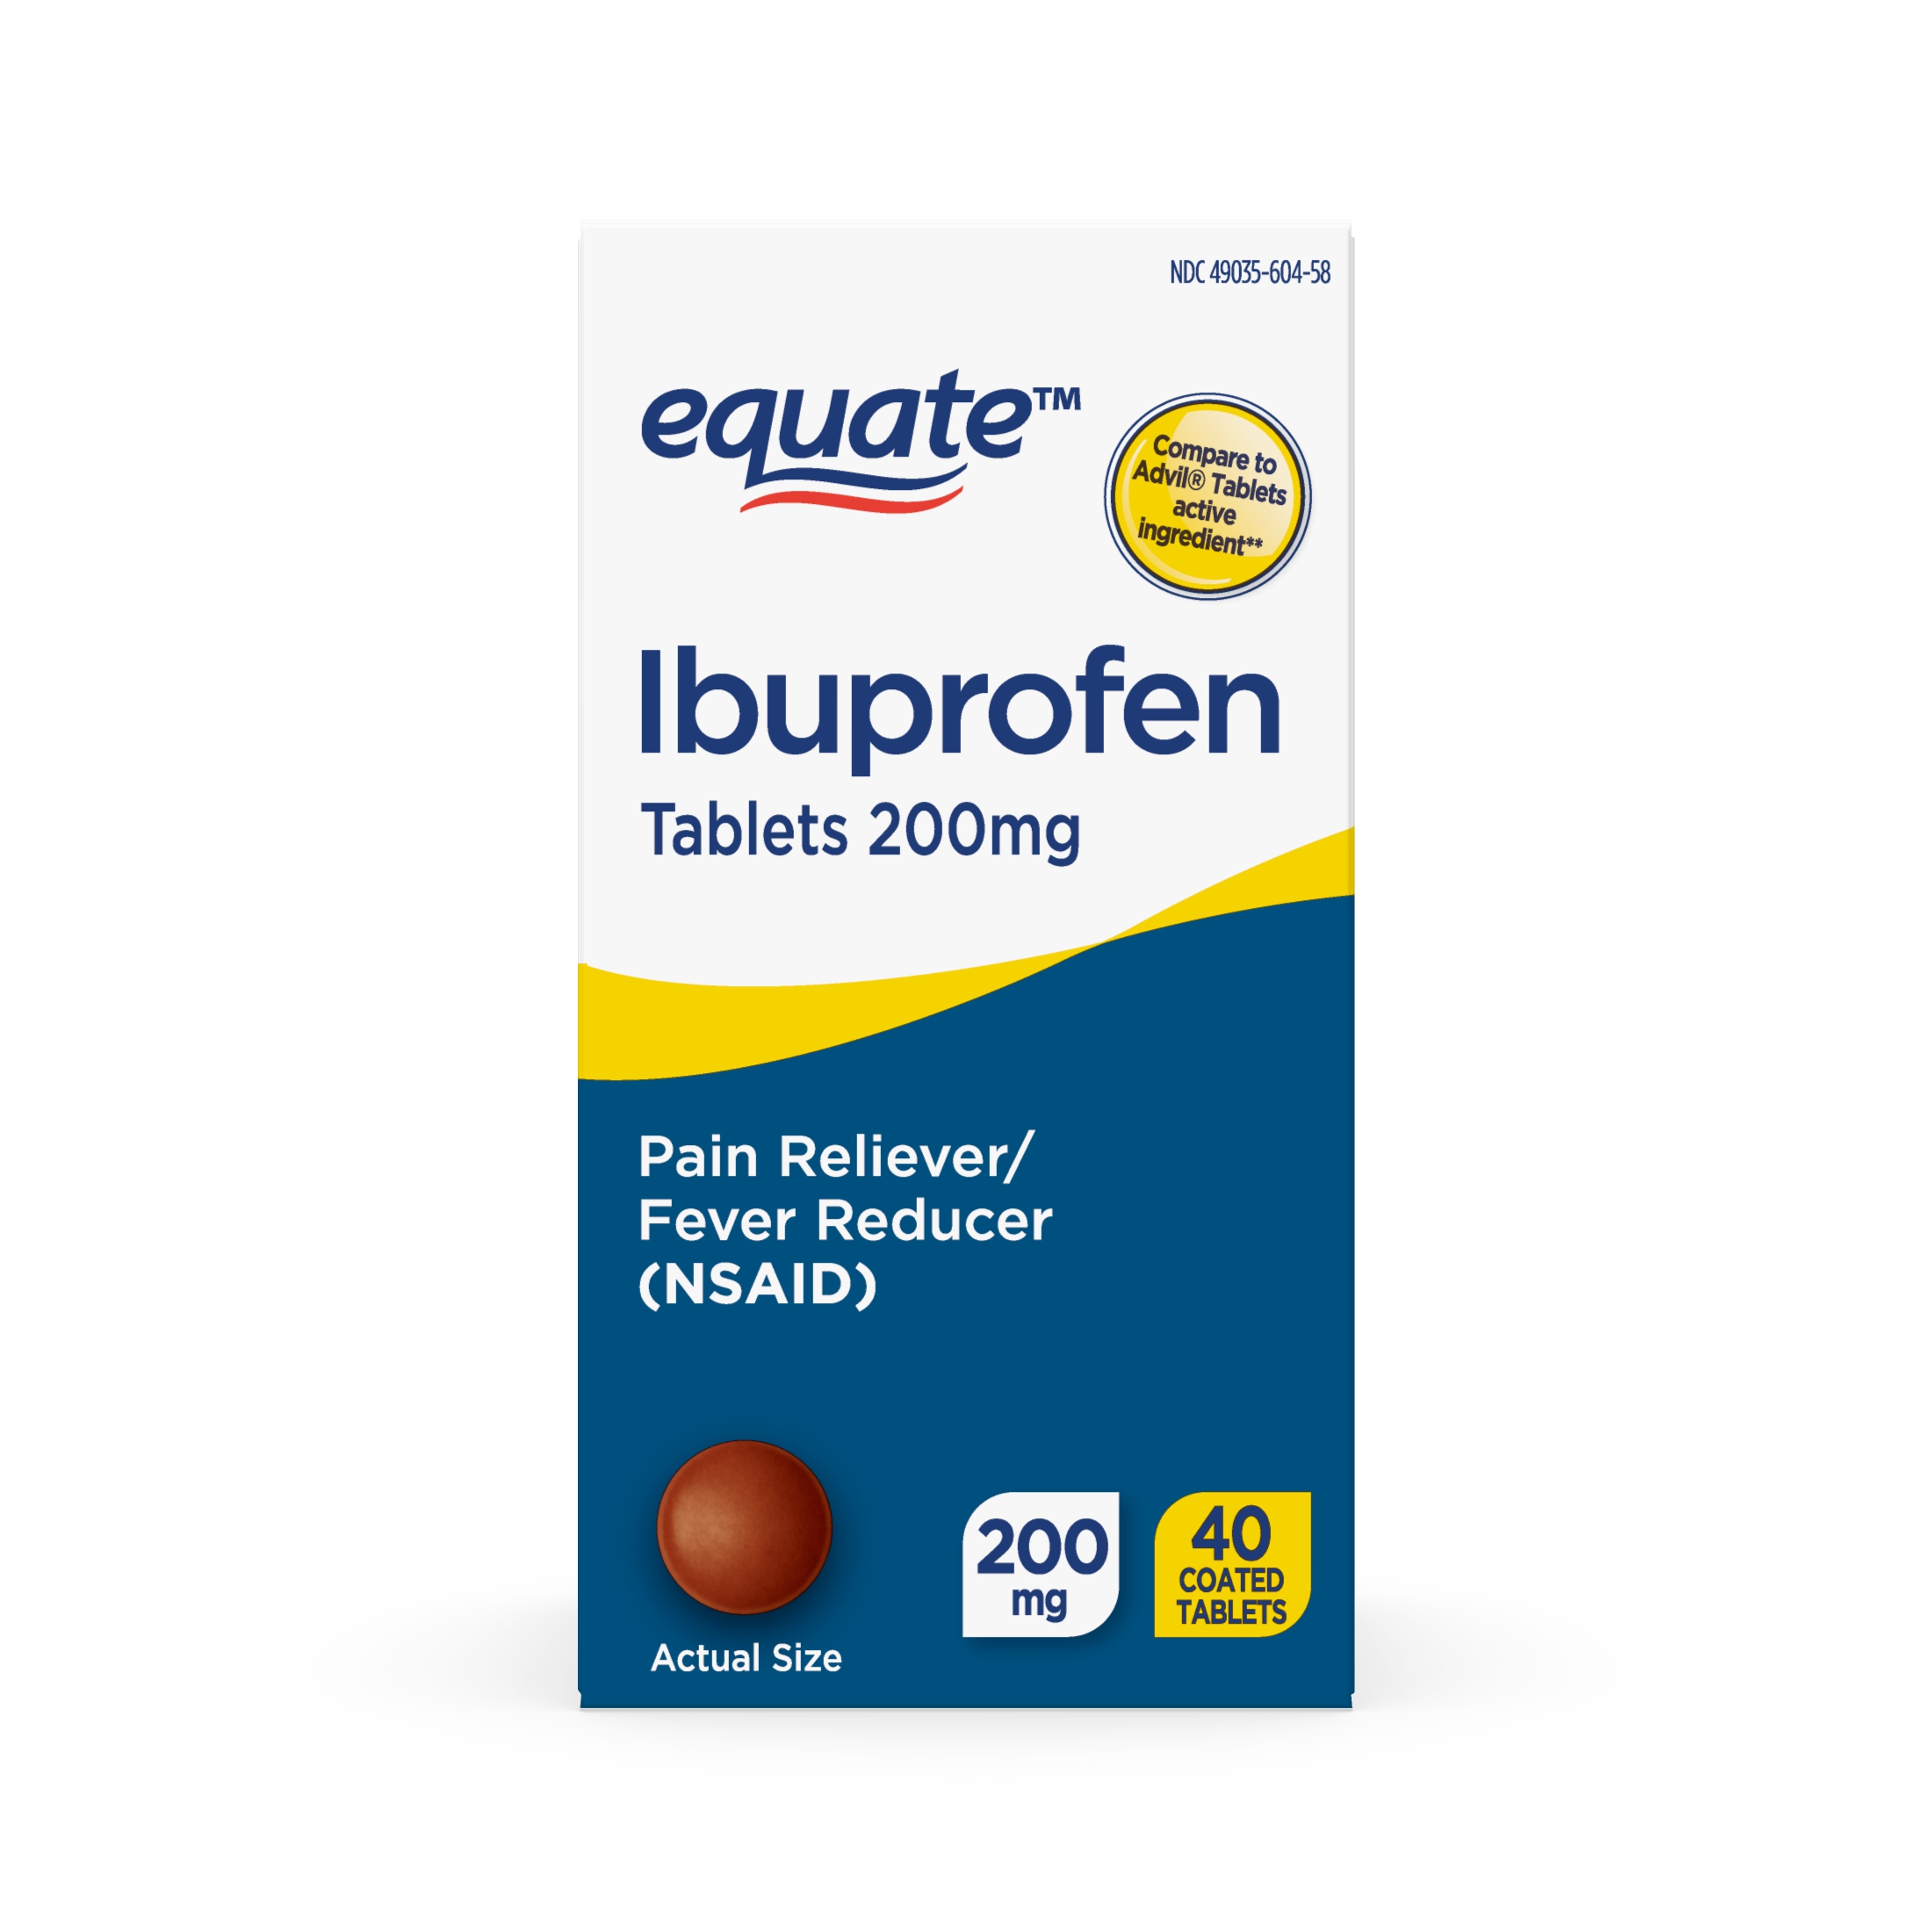 Equate Ibuprofen Tablets 200 mg, Pain Reliever/Fever Reducer, 40 Count - image 1 of 7